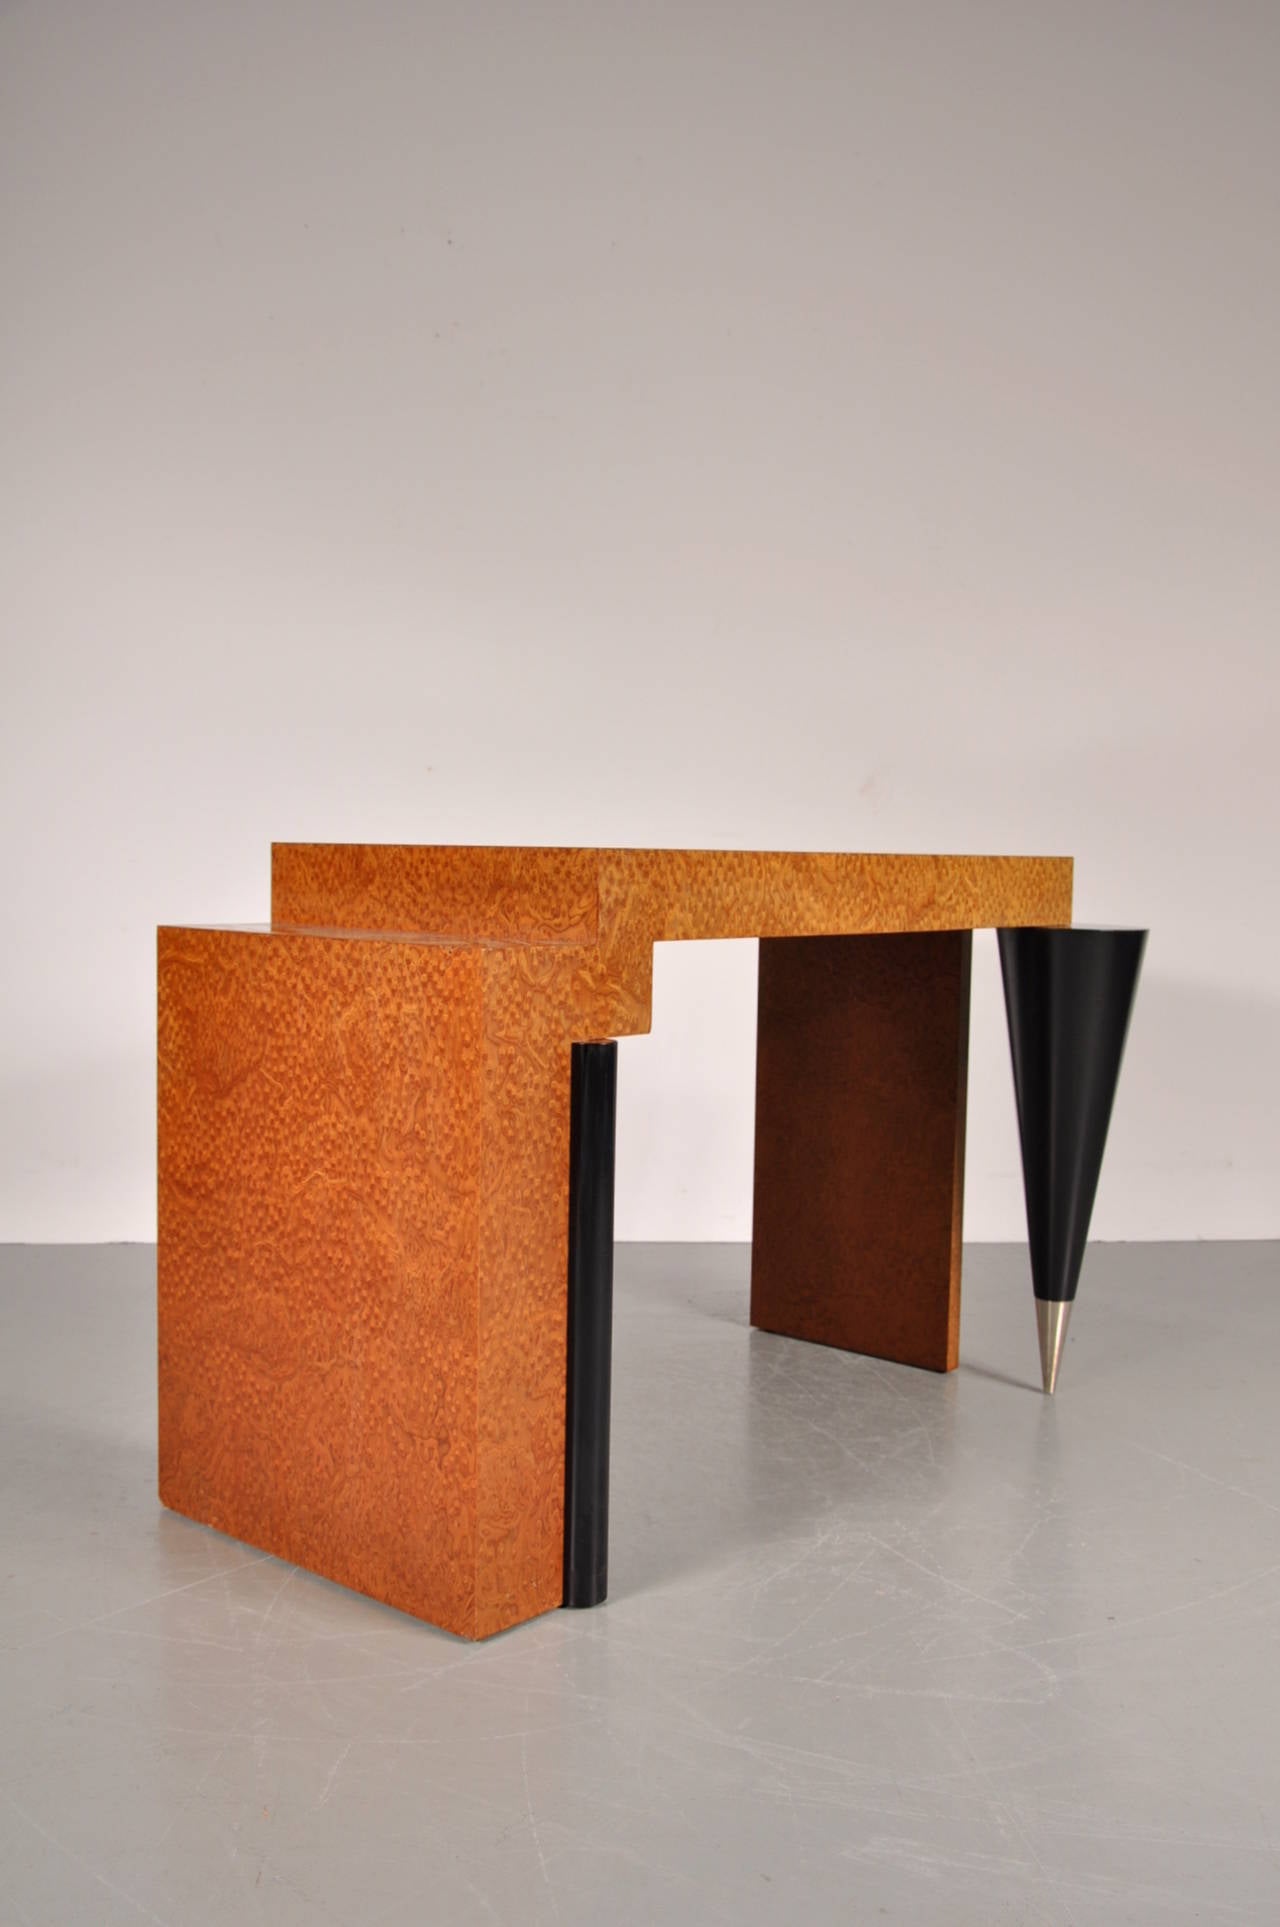 Beautiful Memphis style desk or console table, manufactured in Italy, circa 1980.

The table is made of the highest quality laminated wood. Together with the unique shapes of the legs and the base, this table has a true Memphis feel to it. All